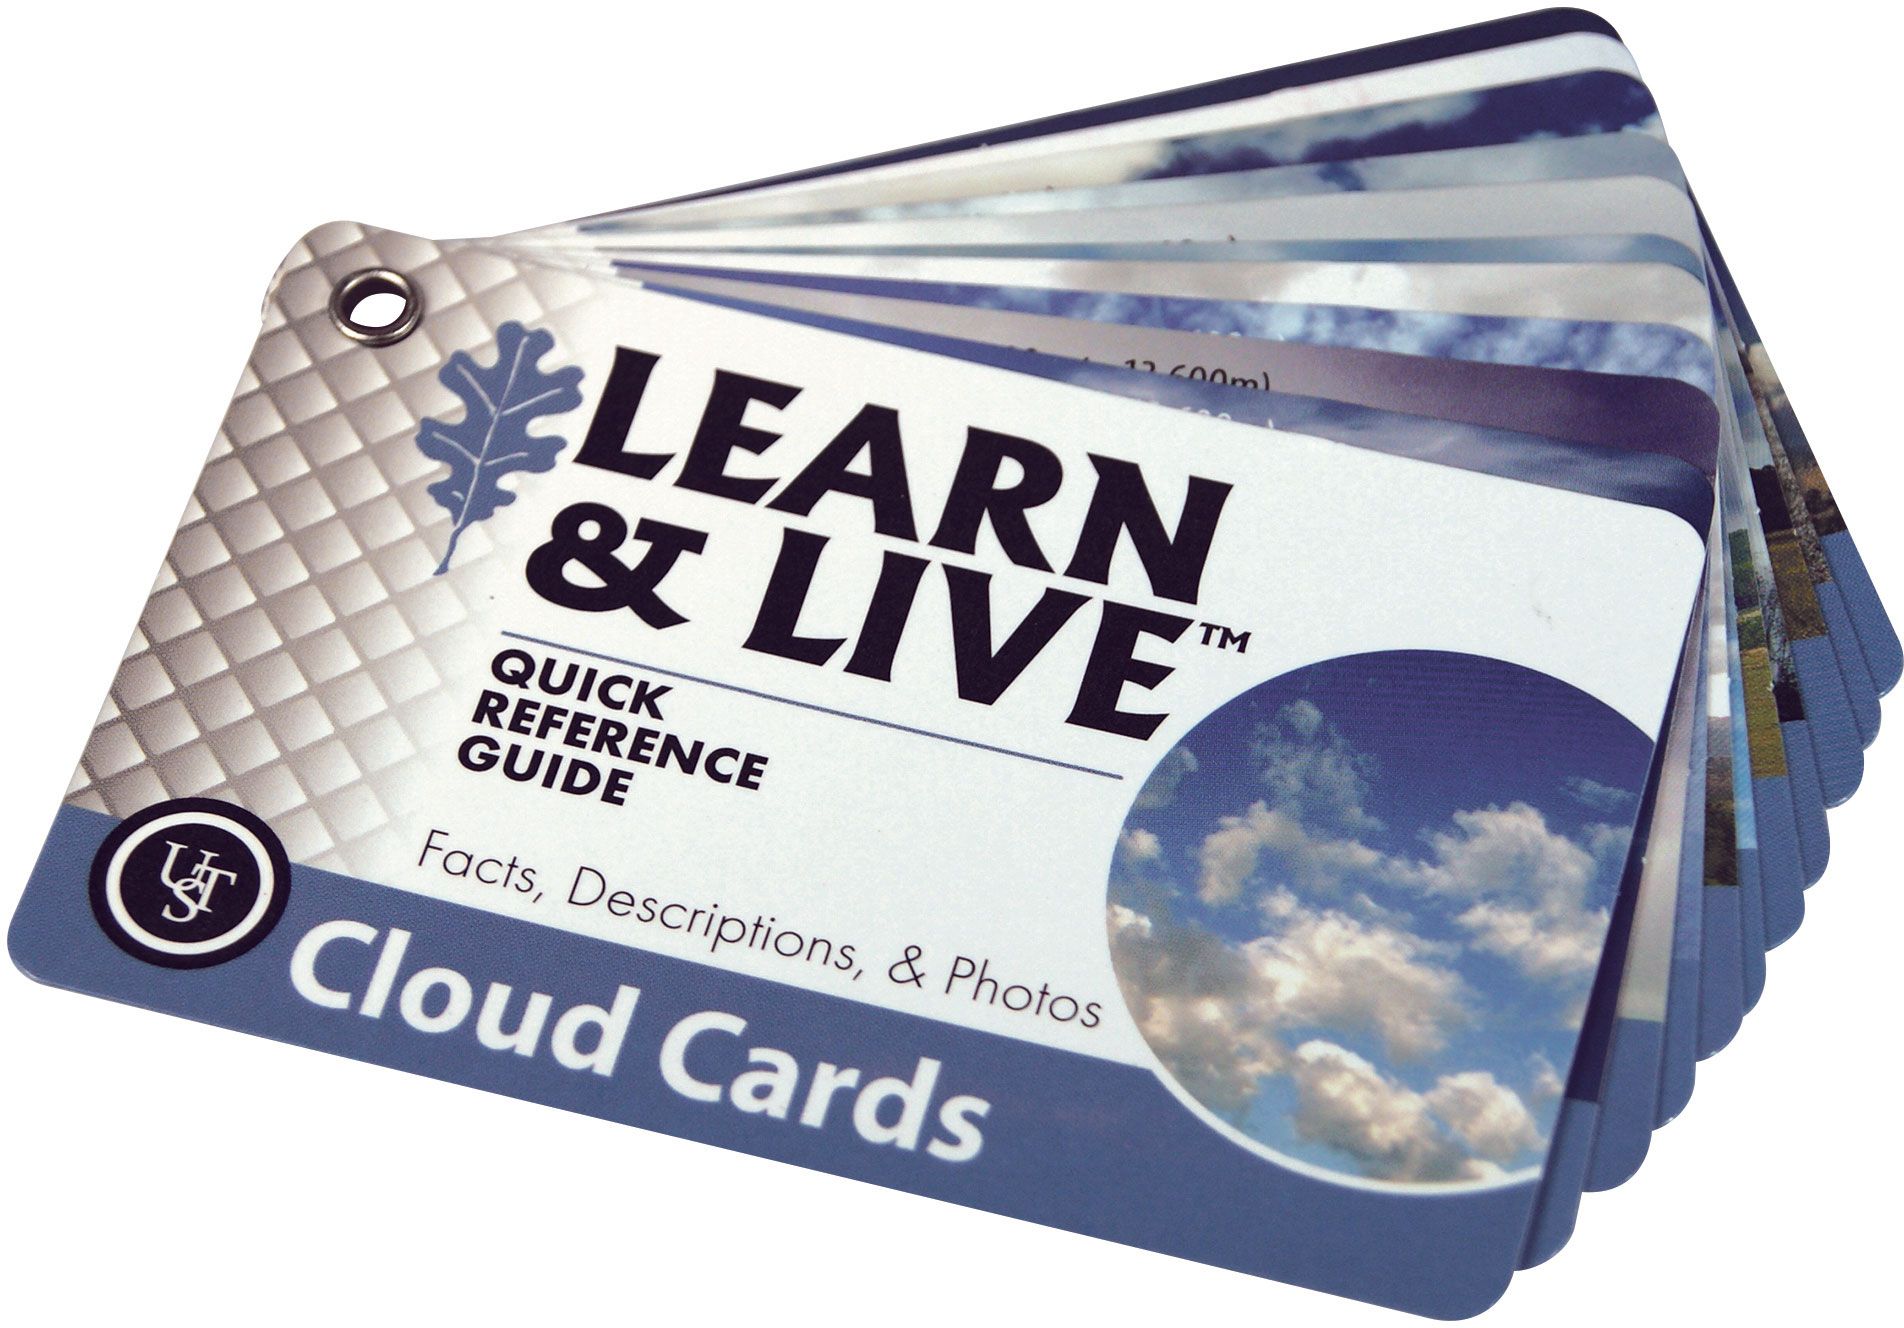 UST 20-80-0260 Cloud Cards Pocket Weather Guide 11 Cards 